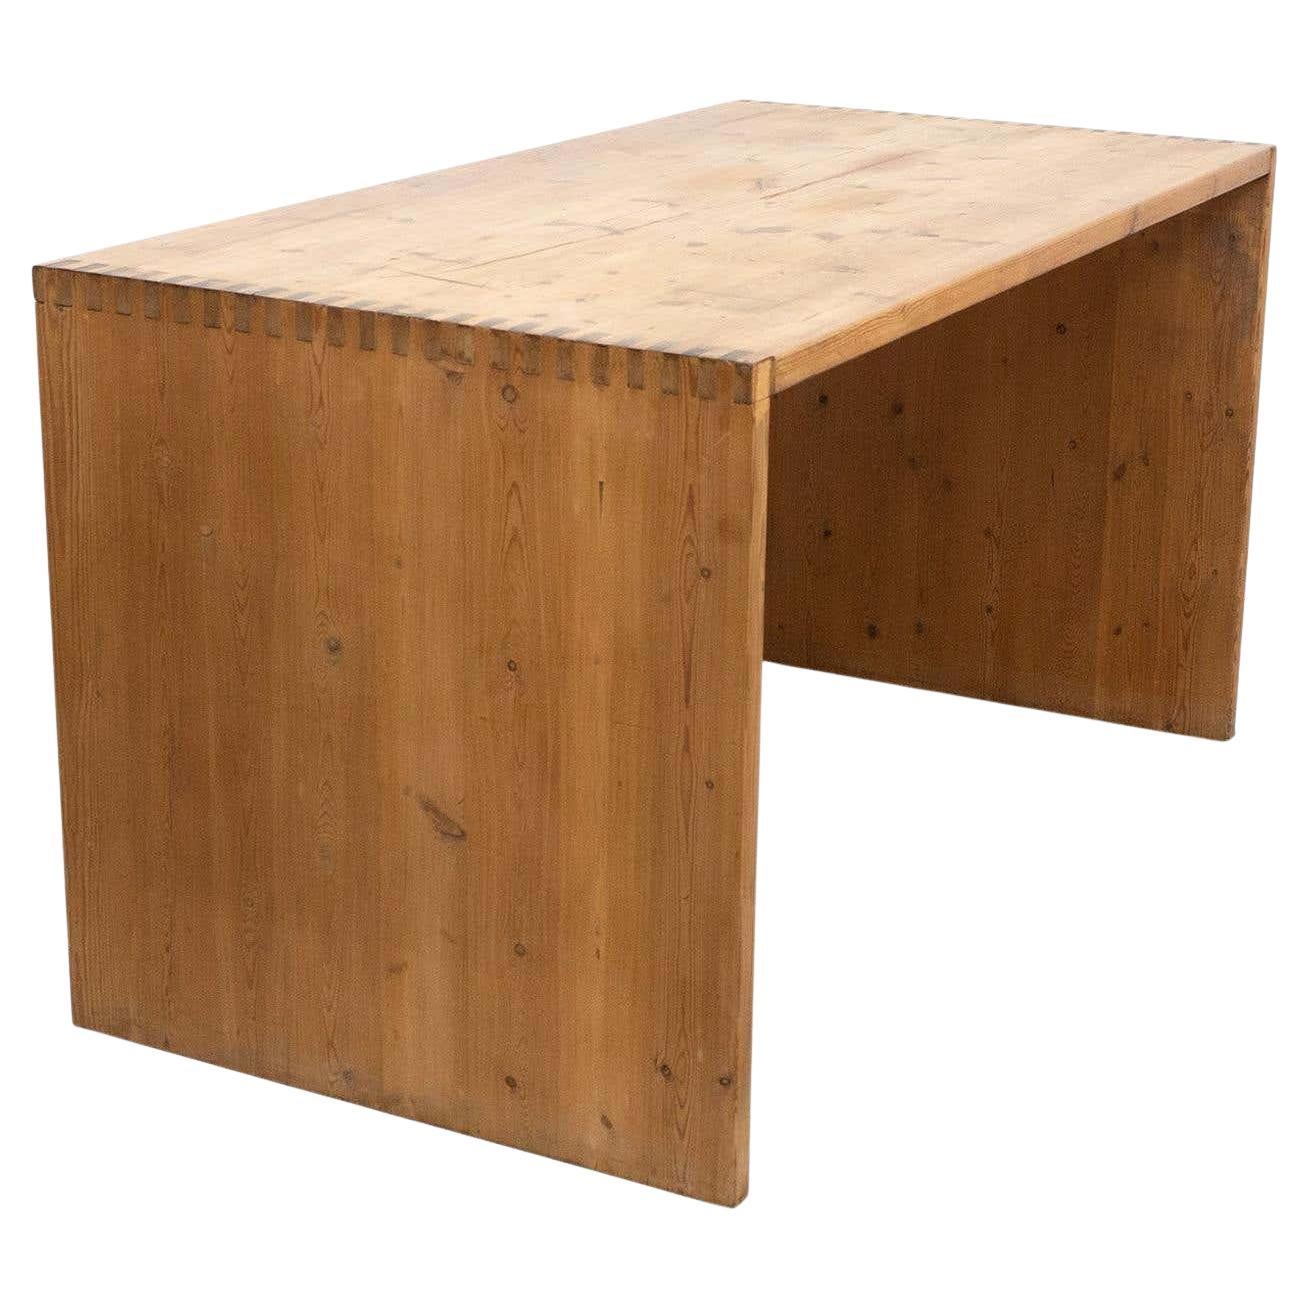 Mid-Century Modern Rationalist Wood Table, circa 1960 For Sale